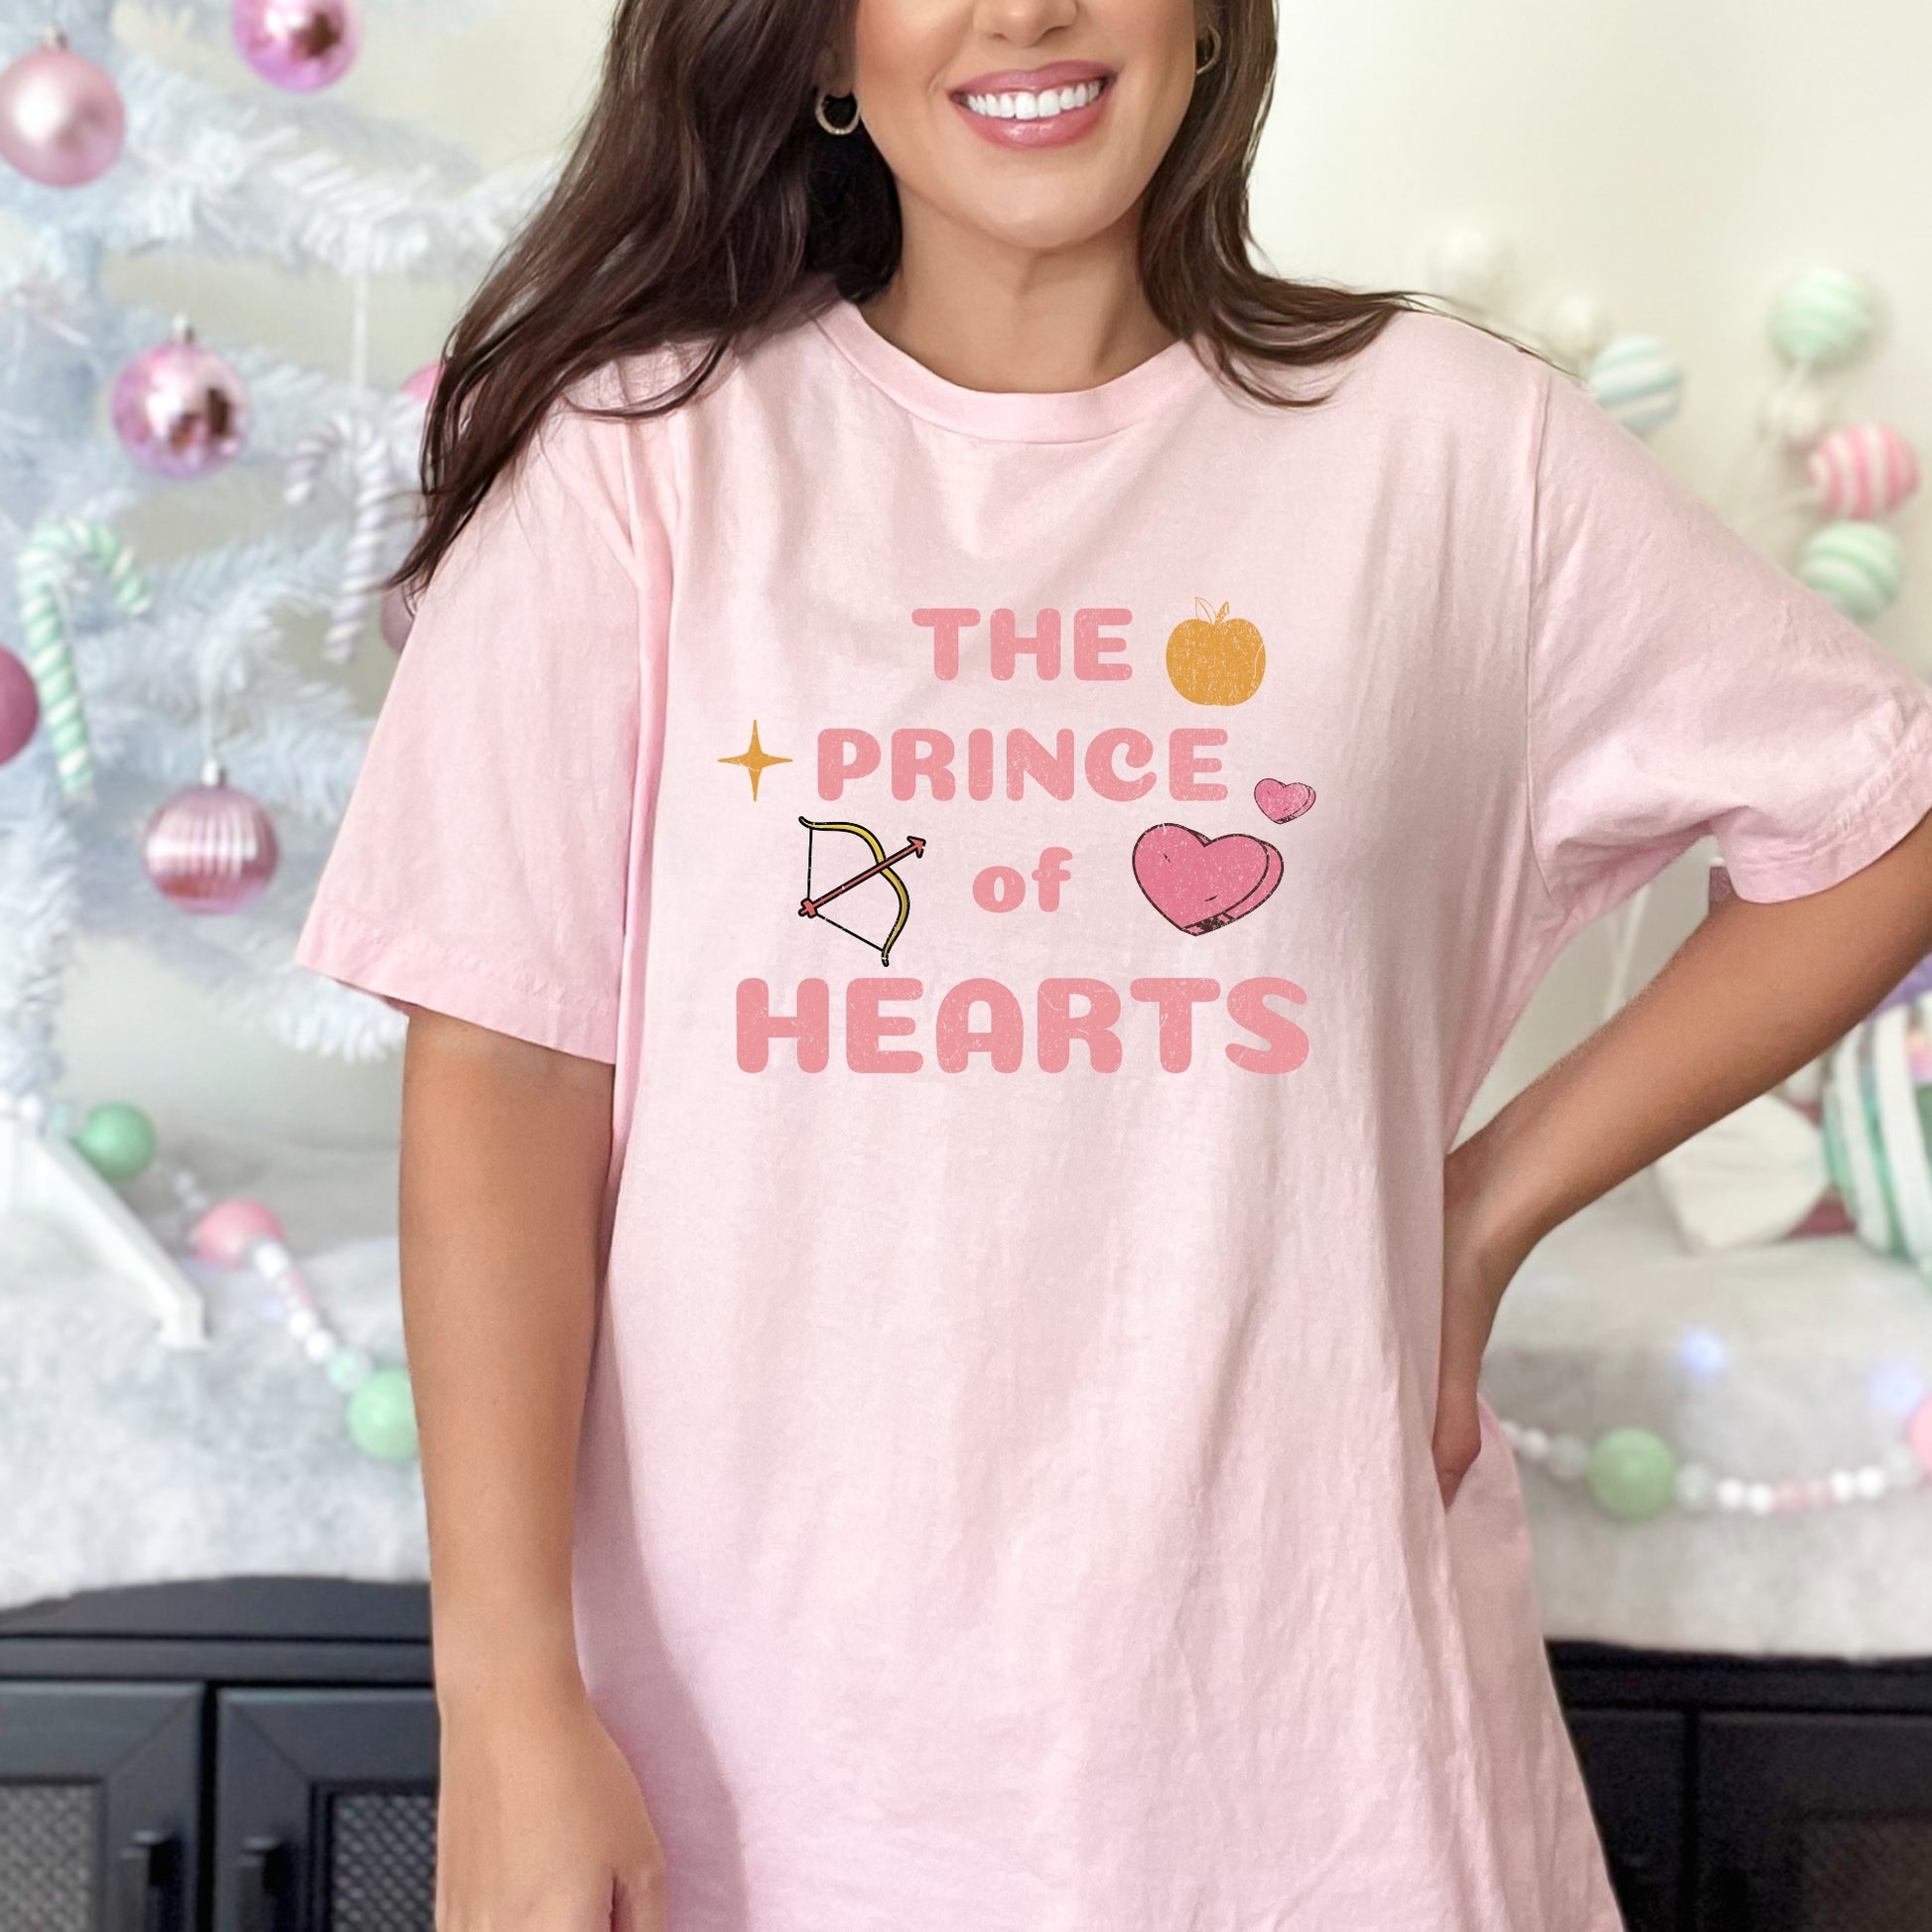 Jacks The Prince of Hearts on a Pink T- Shirt | Once upon a Broken Heart merch | Ink and Stories bookish merch